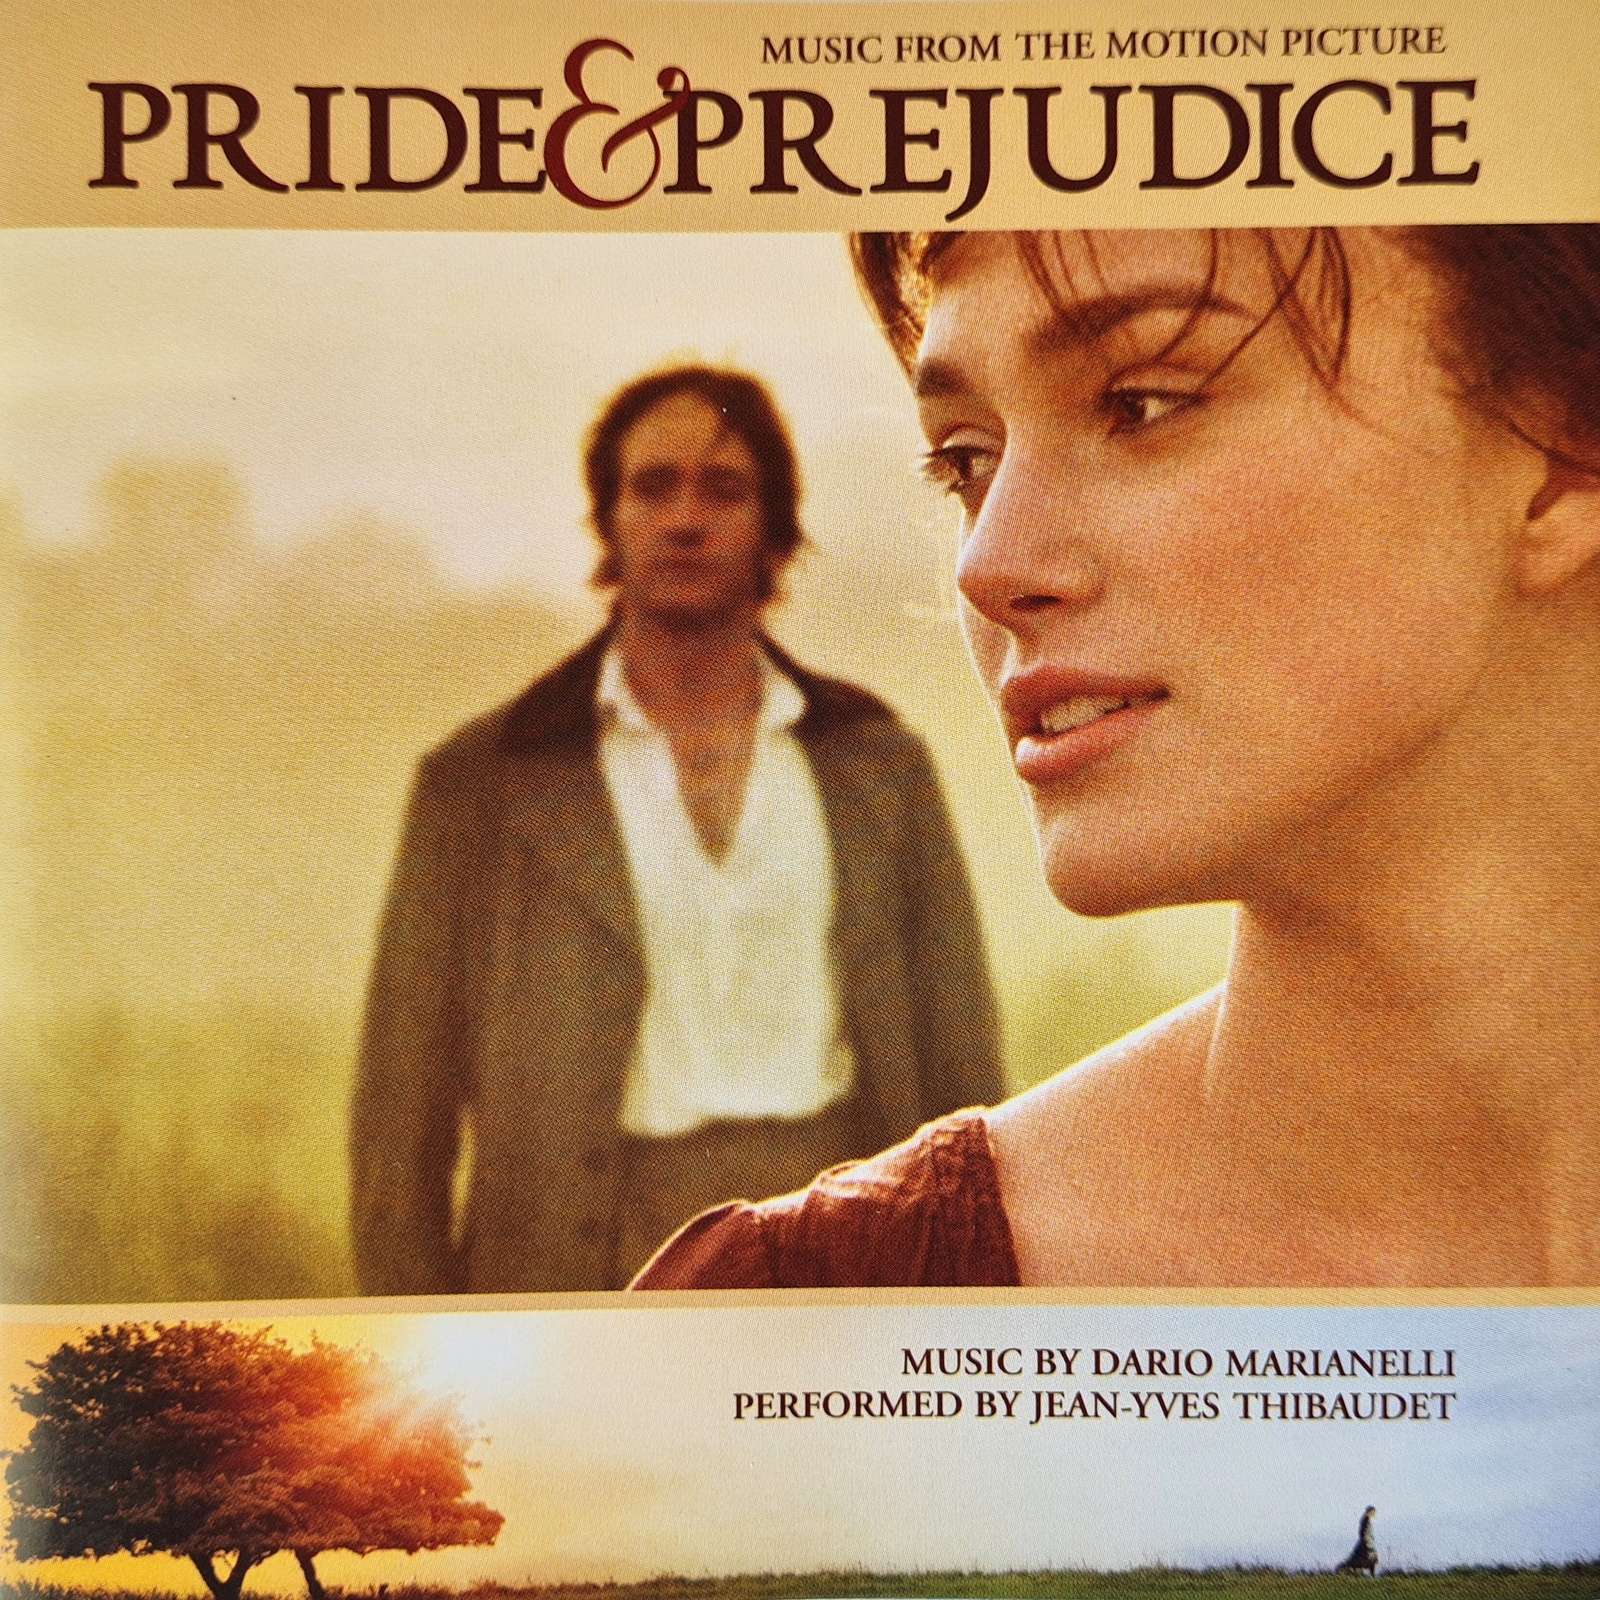 Pride & Prejudice - Music from the Motion Picture (CD)